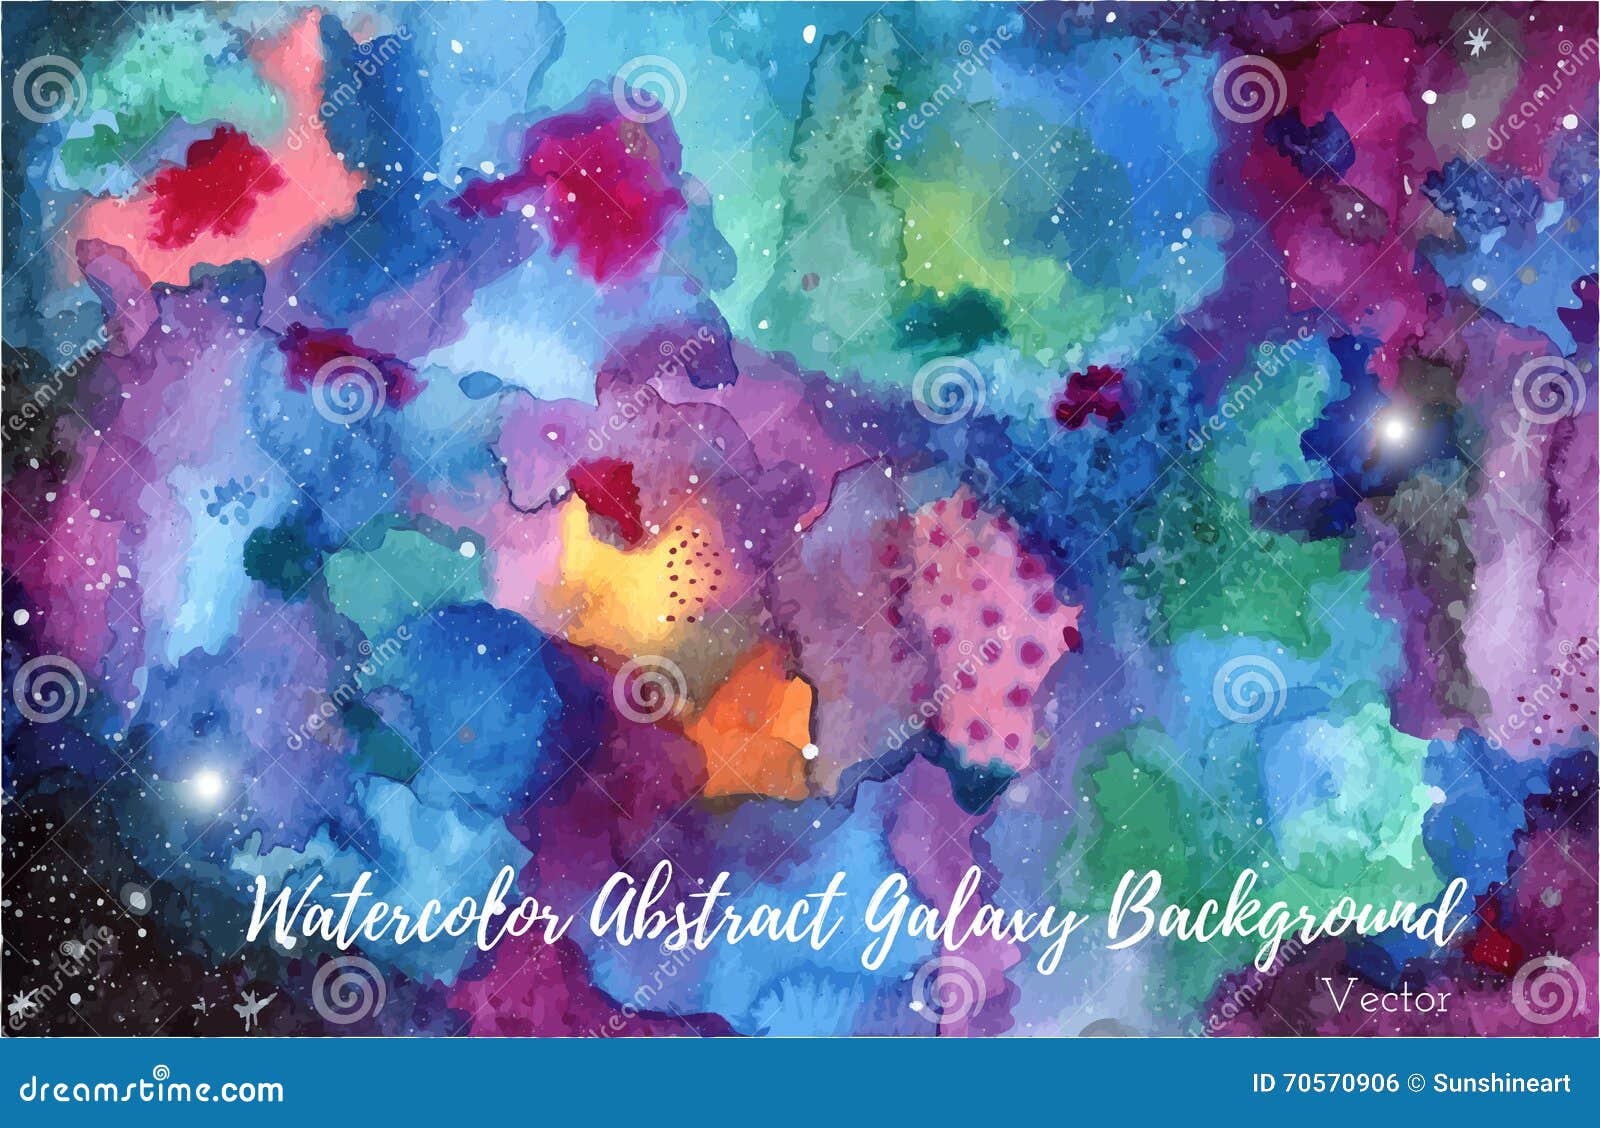 Watercolor Abstract Galaxy Background Stock Vector Illustration